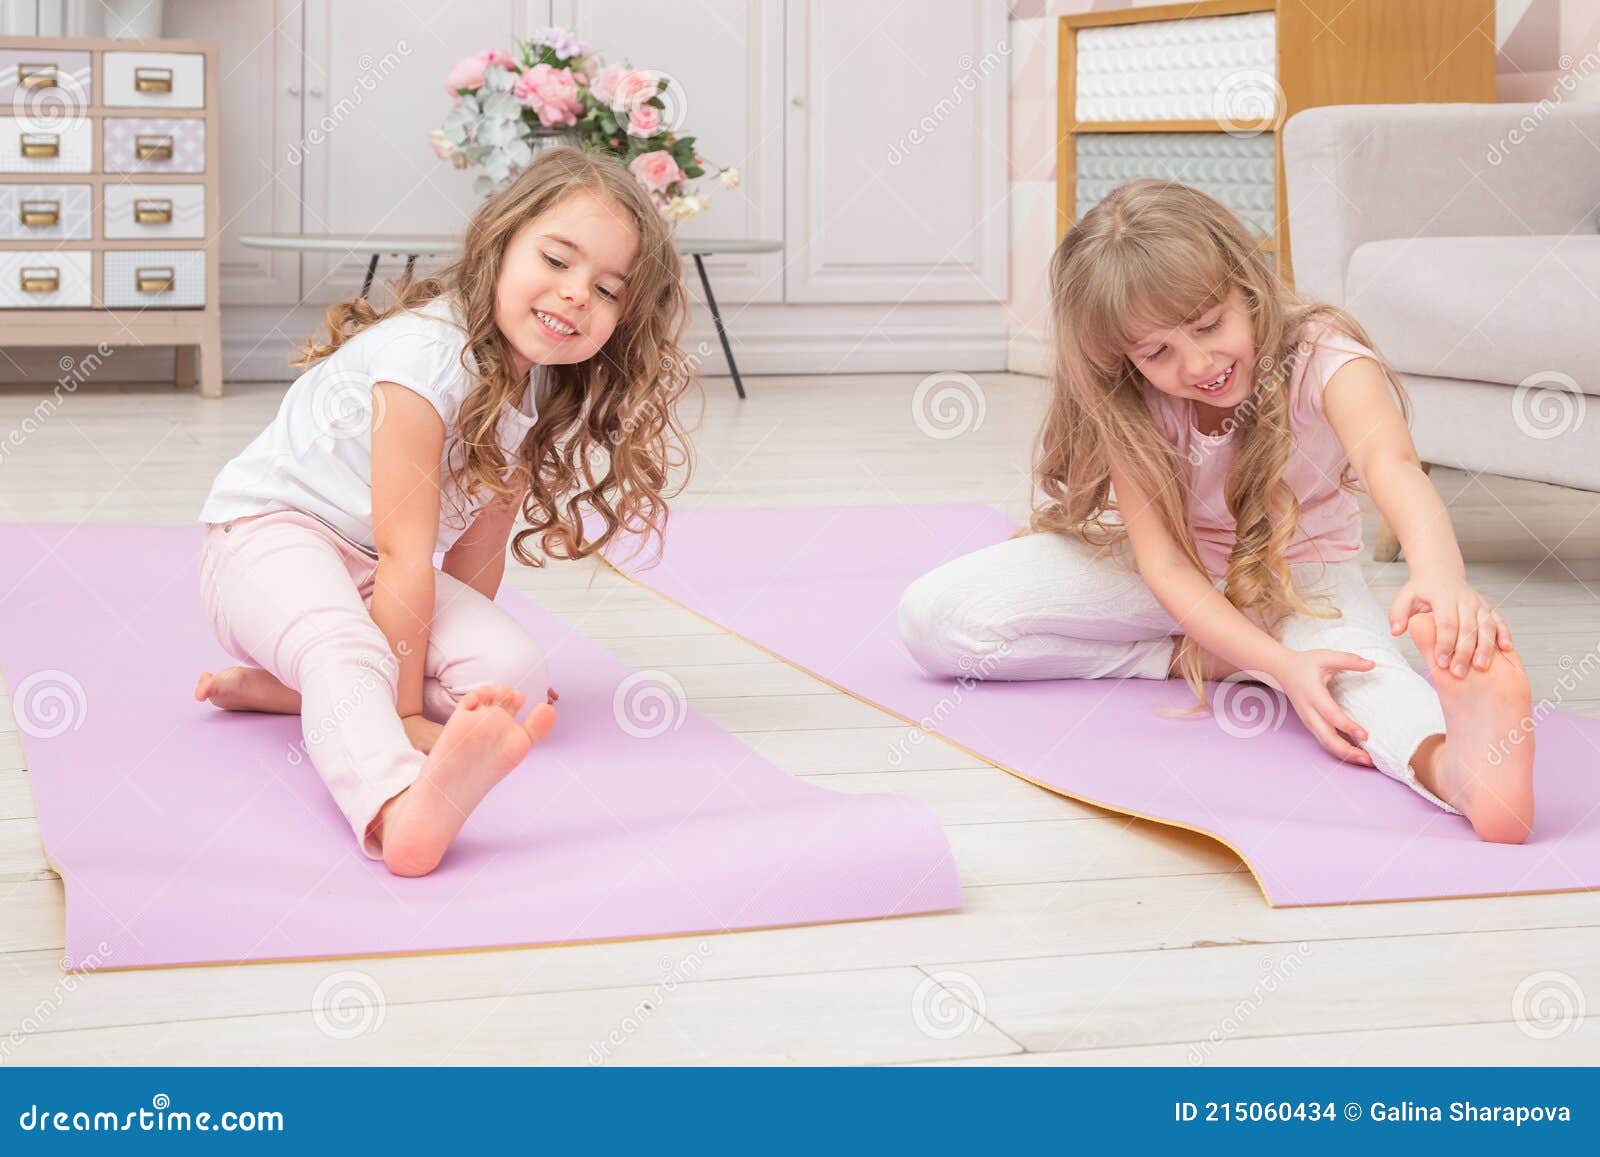 Full Length Front View Smiling Cute Girls Sitting on on Yoga Mat